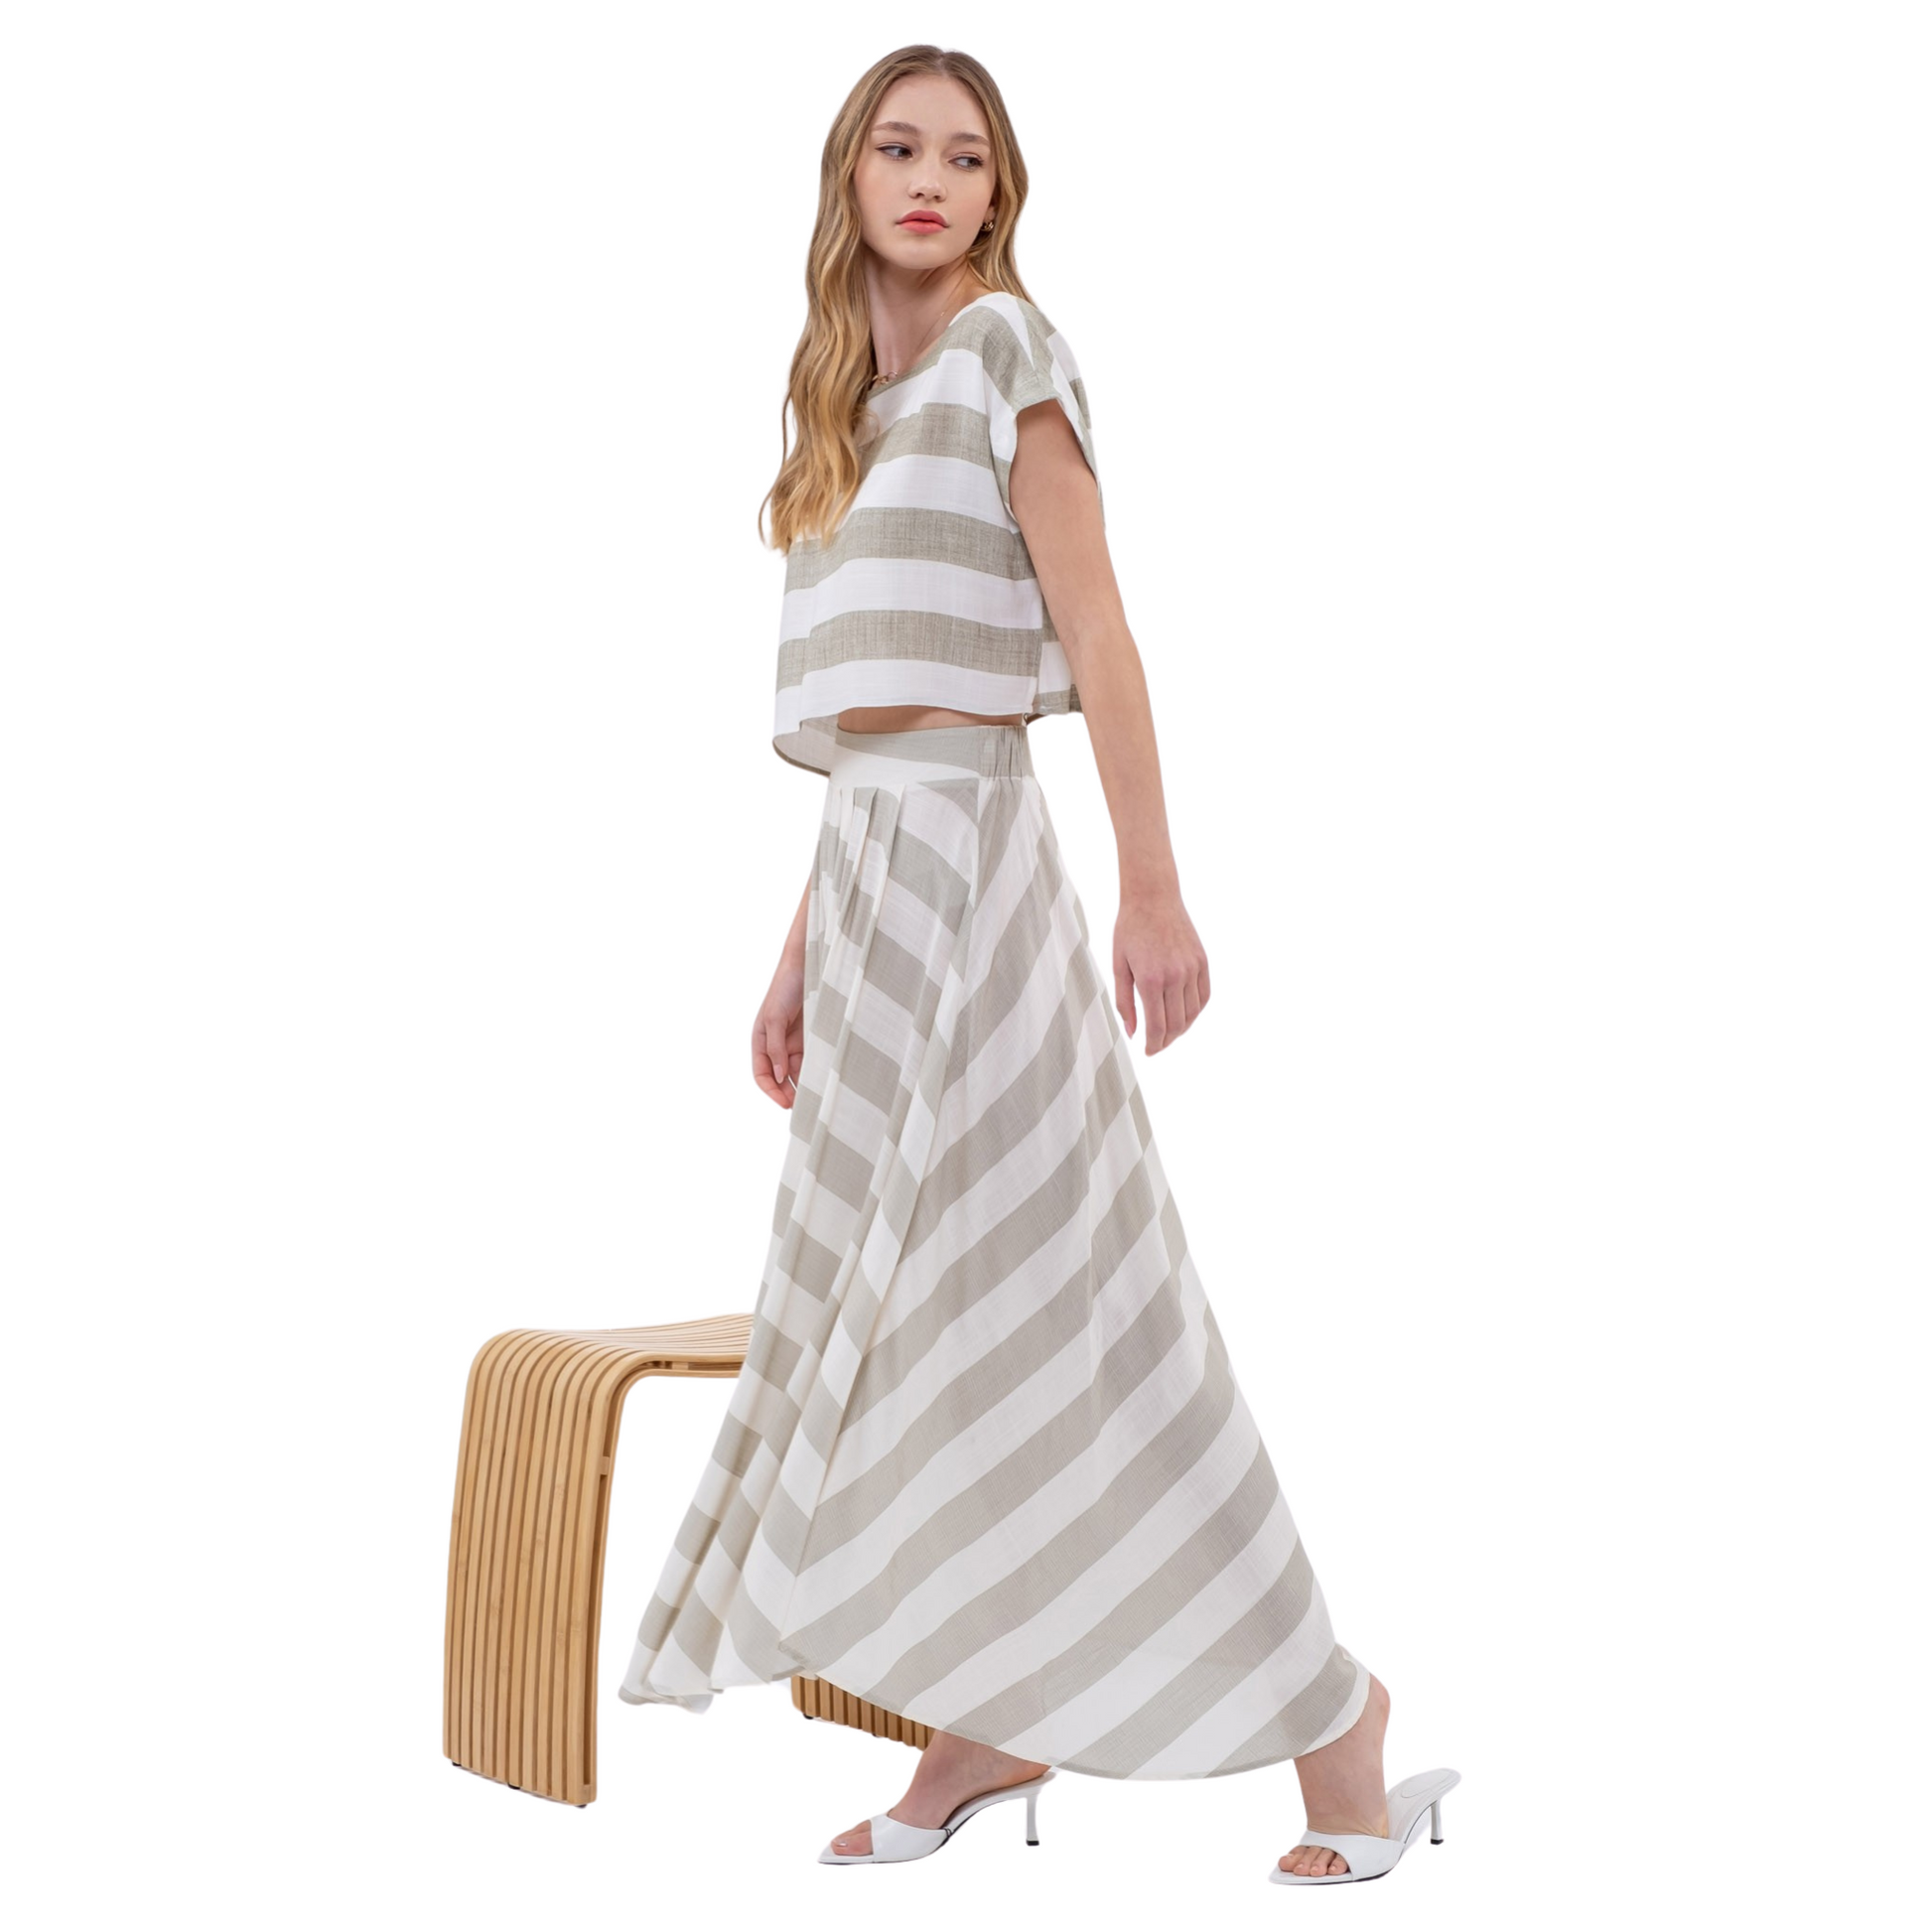 This olive and white striped top and bottom set effortlessly combines style and comfort. The short-sleeve cropped top and midi skirt create a modern silhouette, perfect for any occasion. Made from high-quality fabric, this set is a must-have addition to your wardrobe.